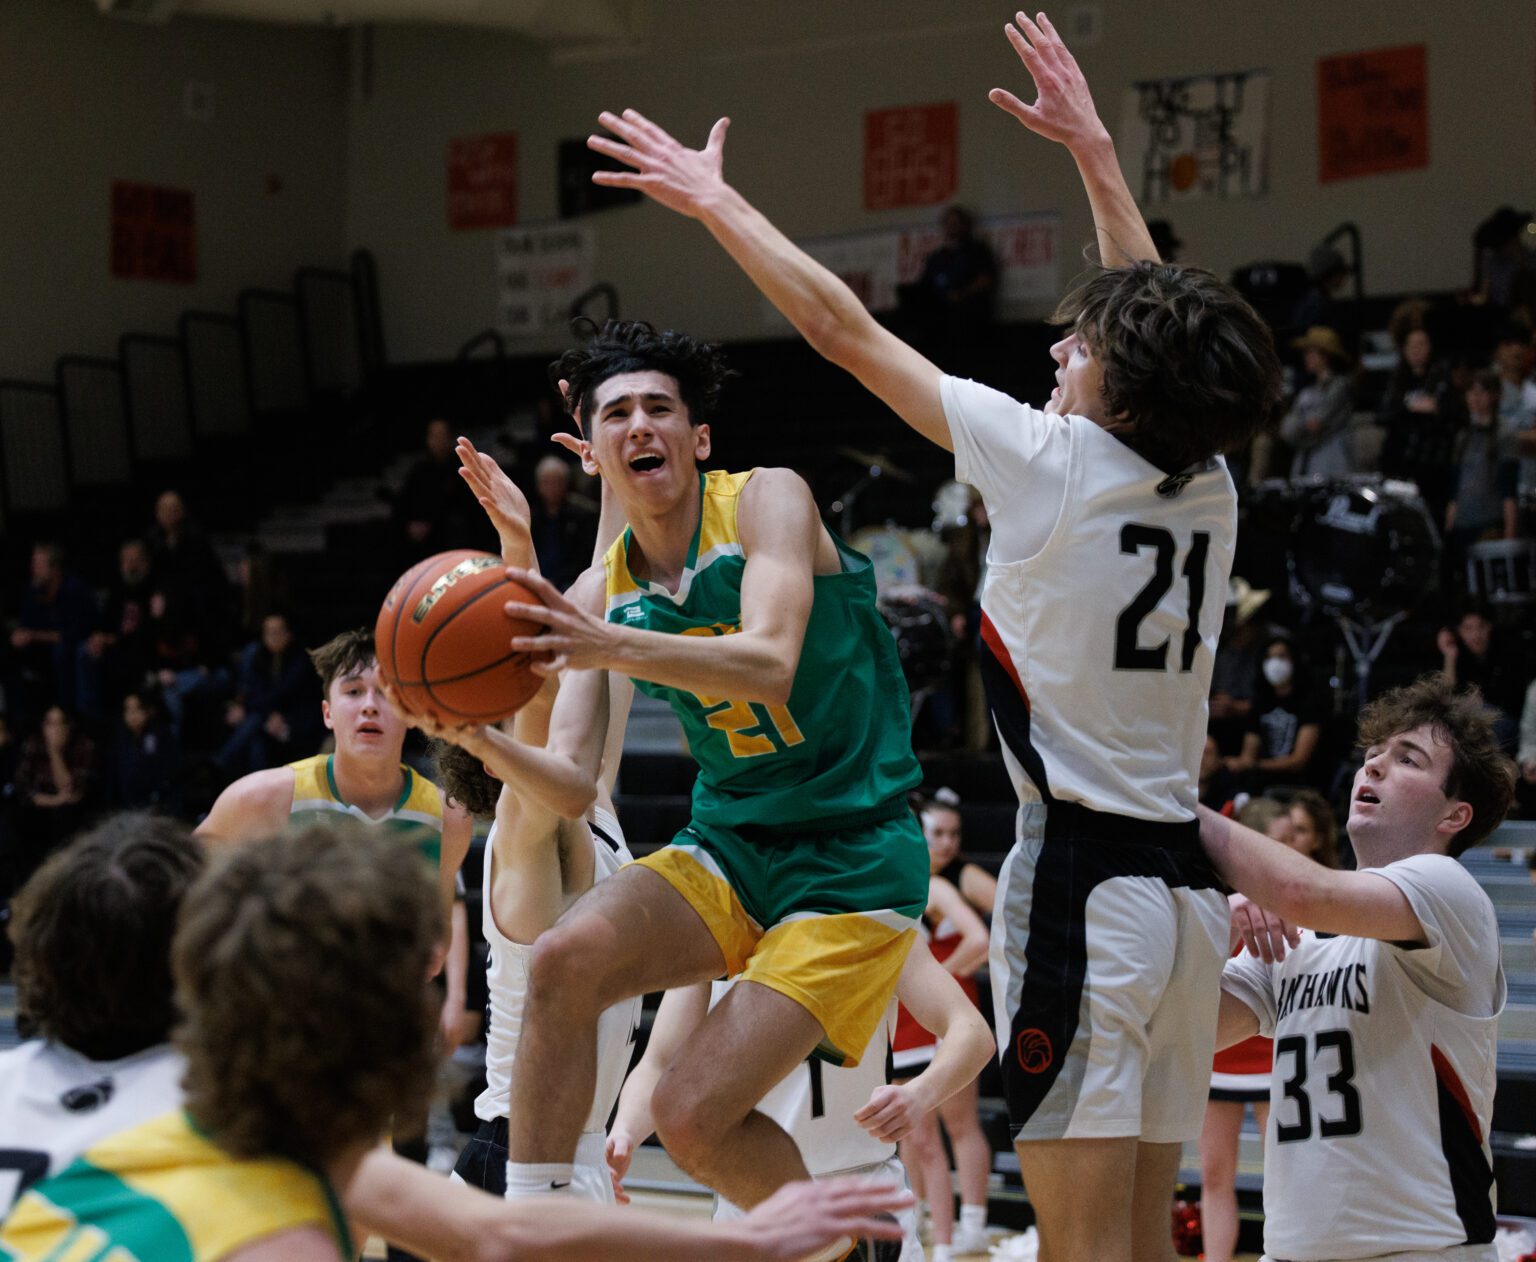 Lynden’s Anthony Canales leaps and throws up a shot as Bellingham’s Kincade Vanhouten looks for a block in the first half. Lynden beat Bellingham 69-44 on Jan. 5.